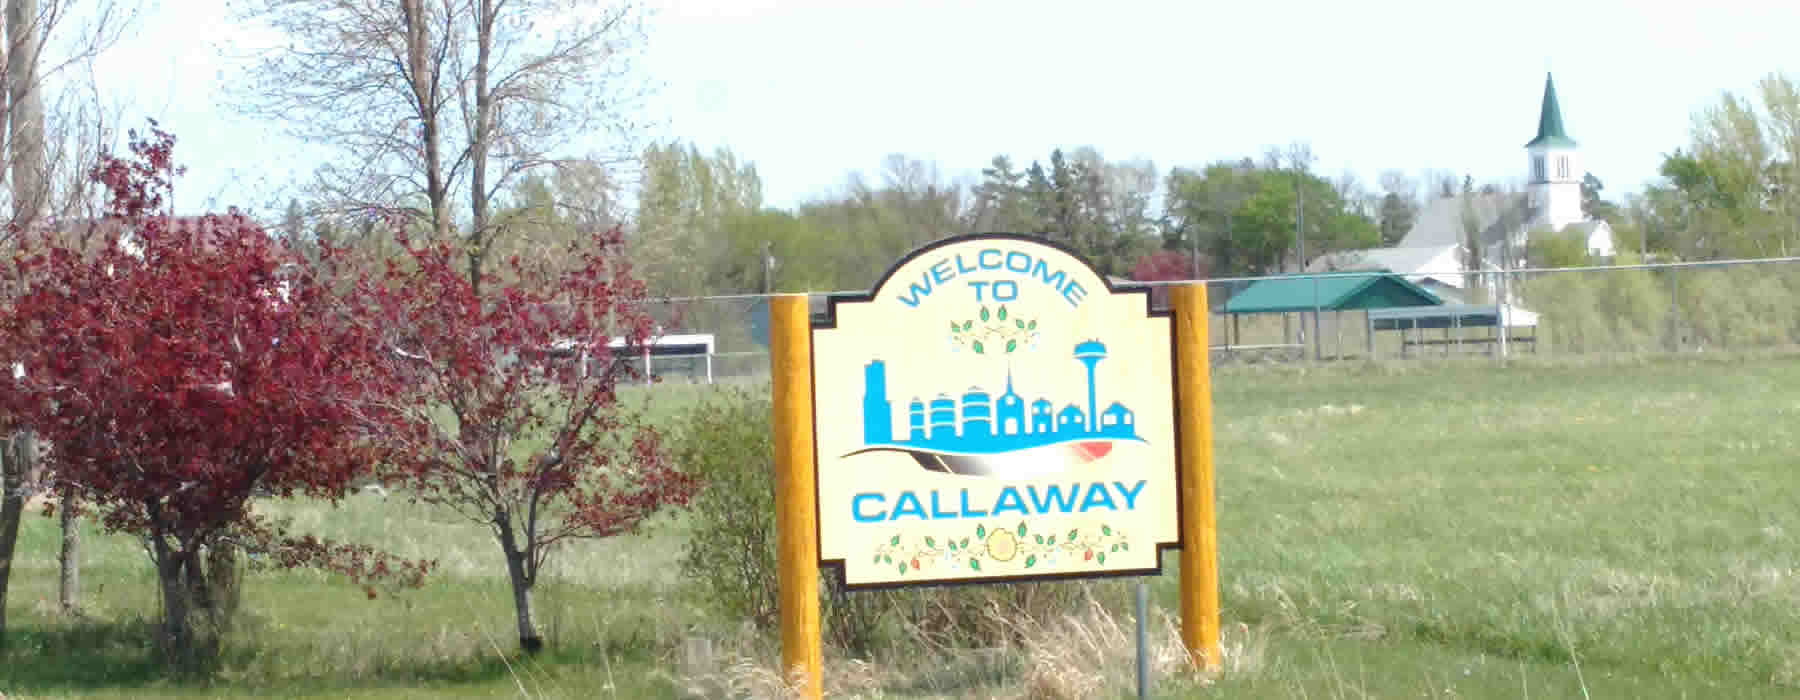 Police Department Policies for the City of Callaway, Minnesota